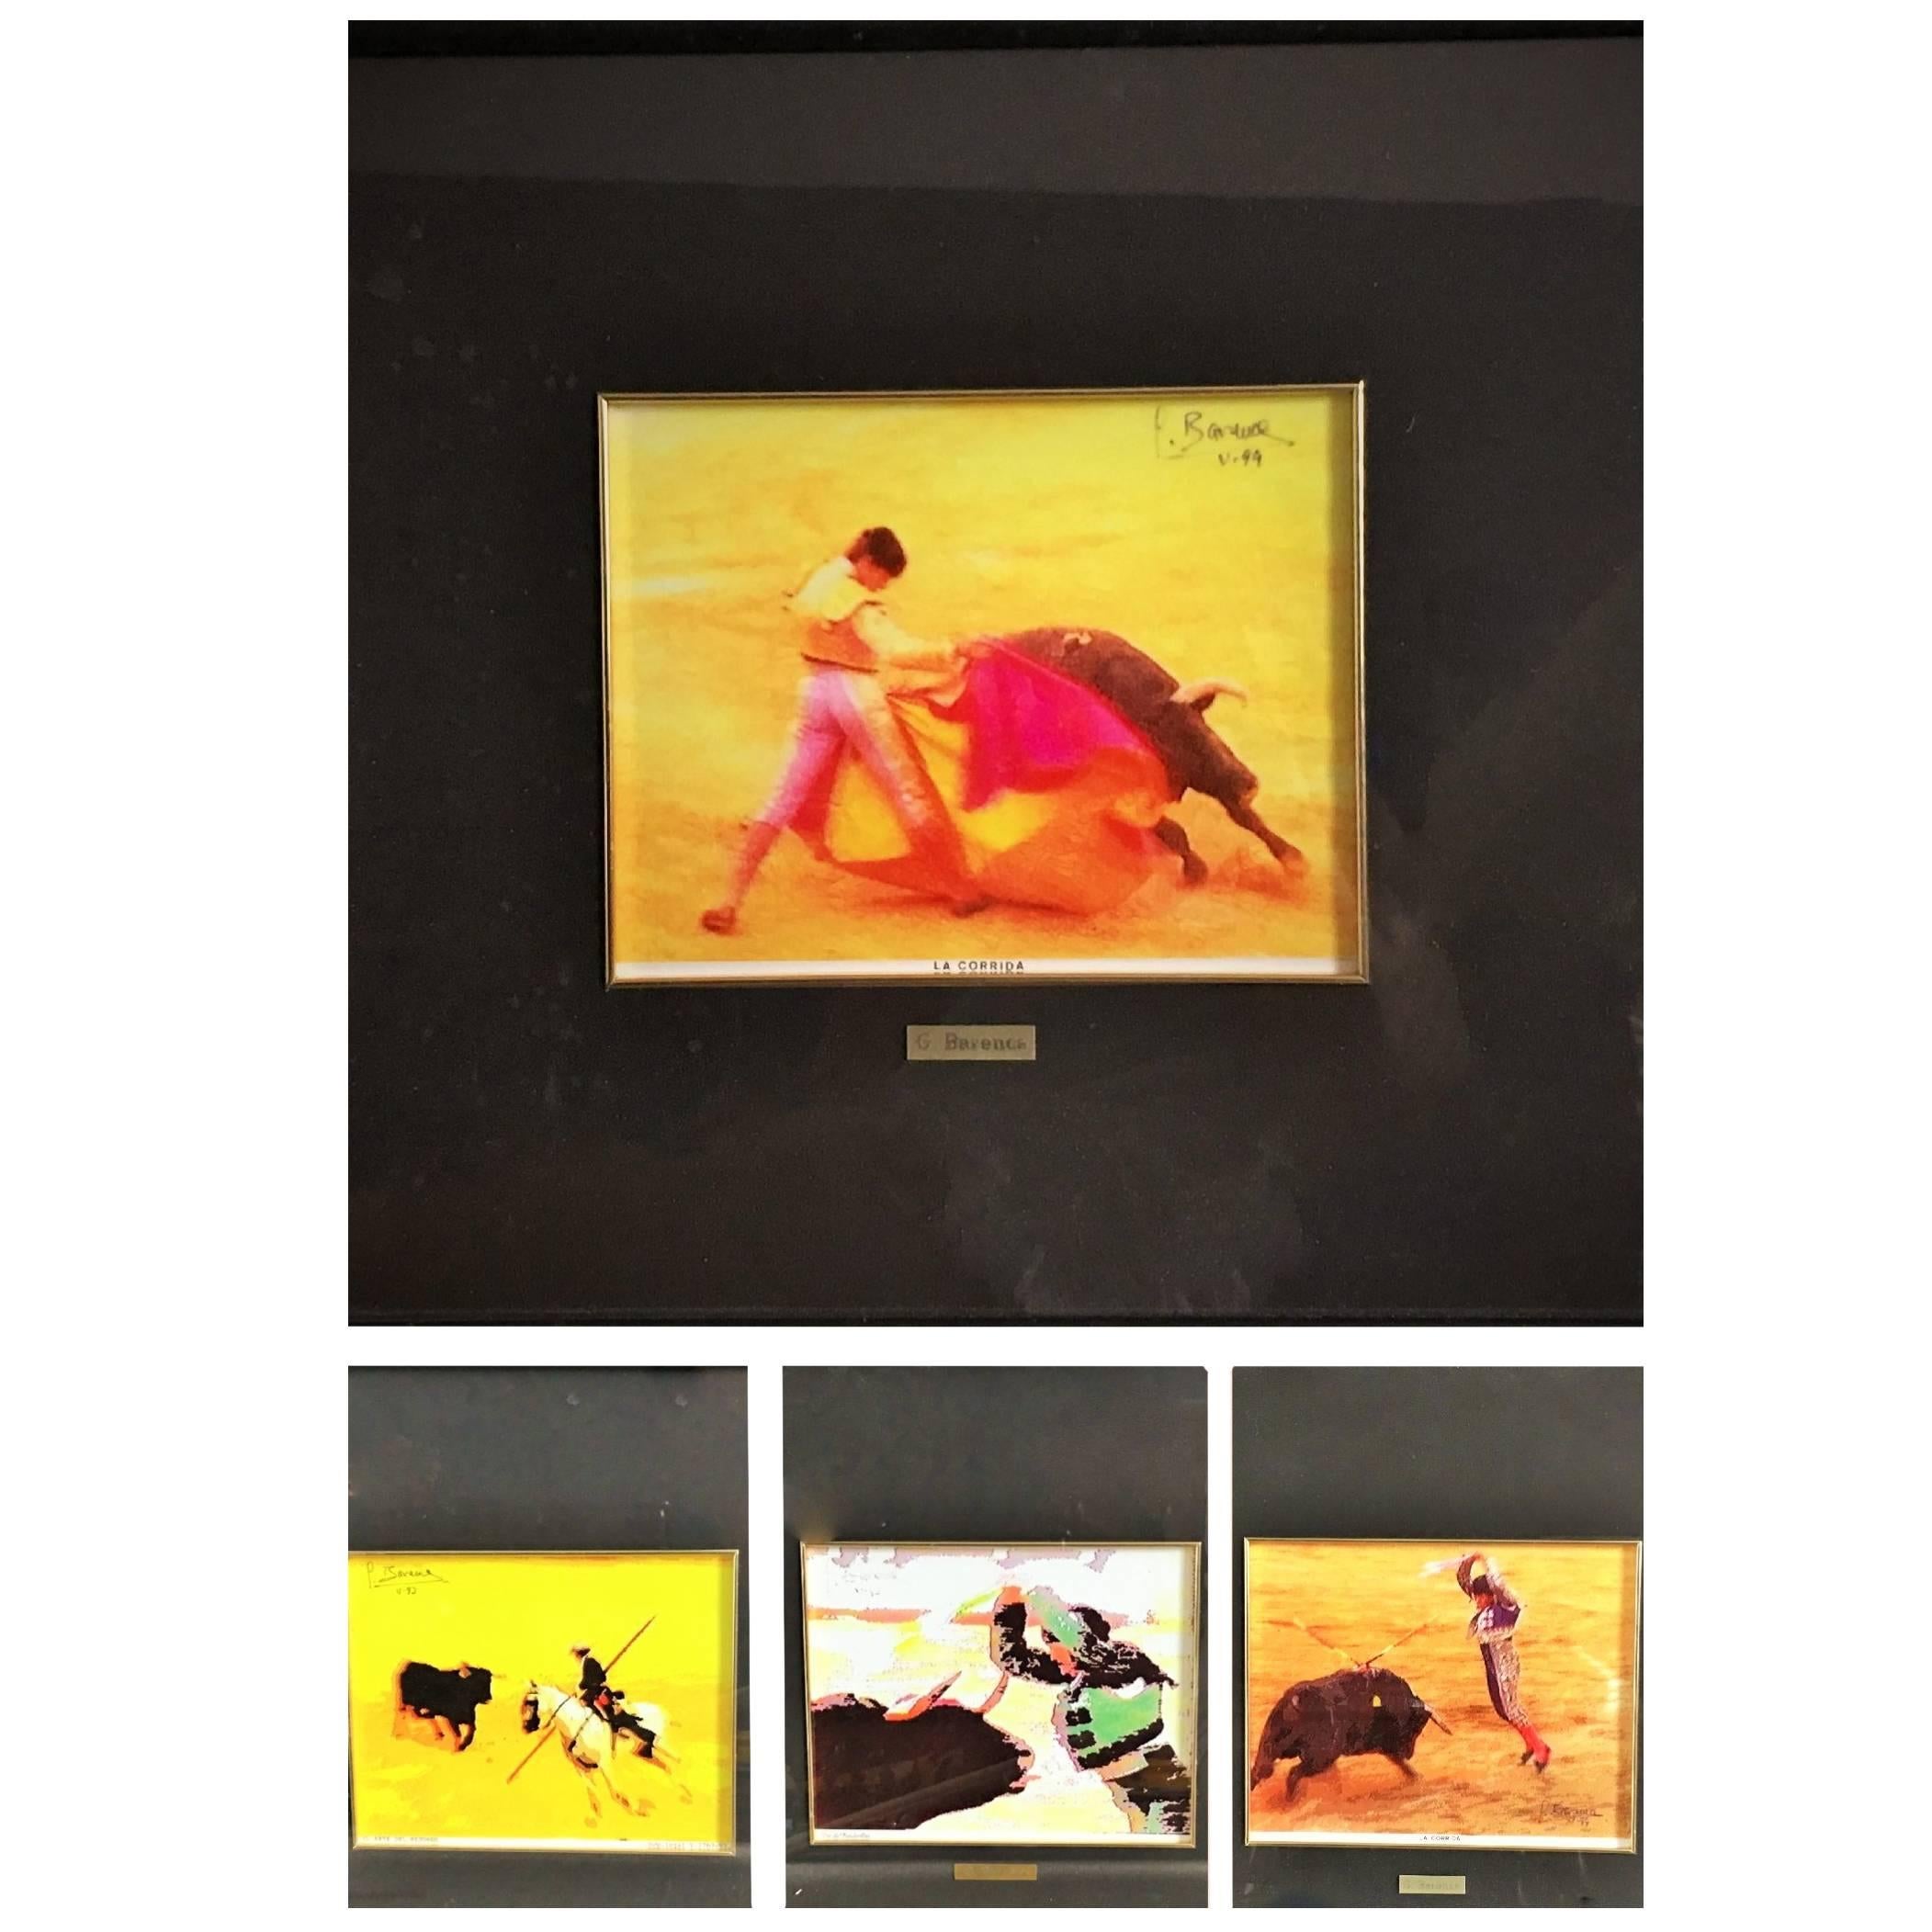 Barenca, 1994, Spain., Set of Four Lithography about Bull Fight